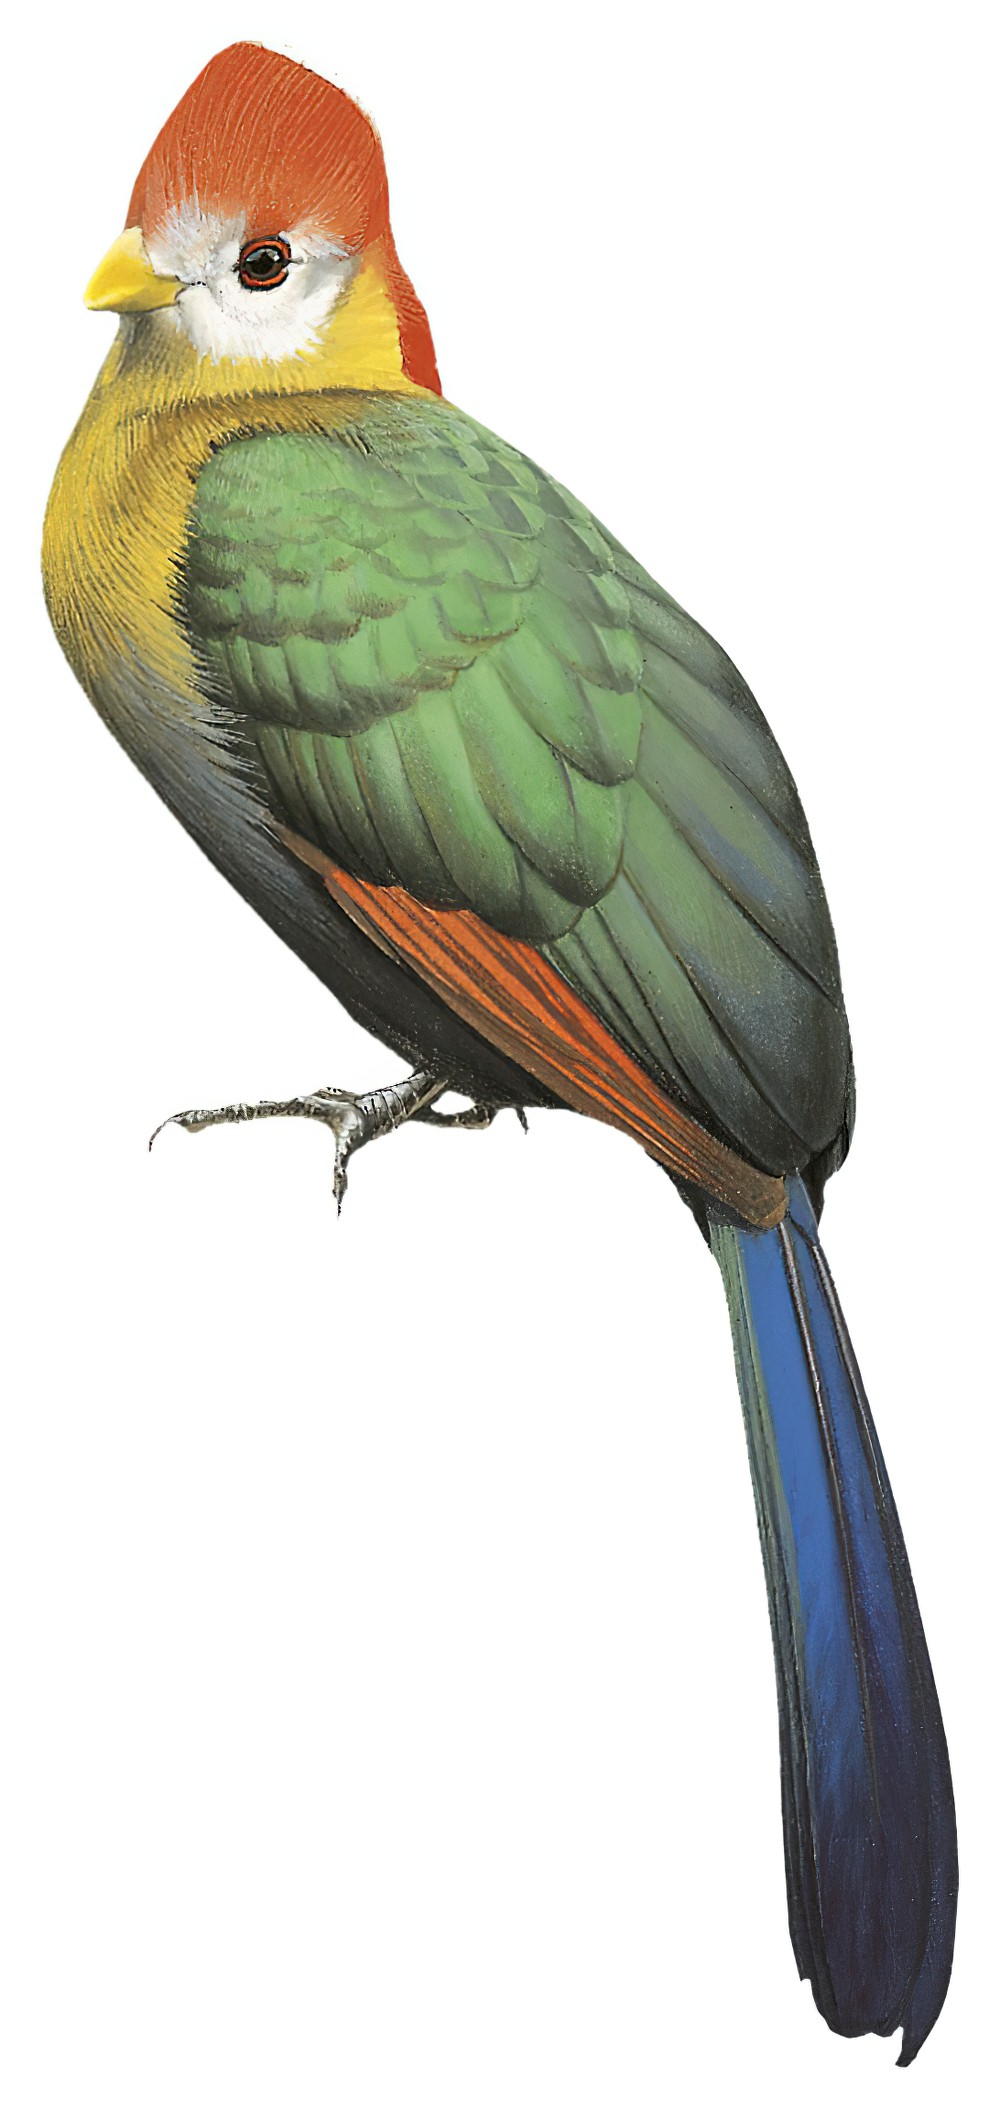 Red-crested Turaco / Tauraco erythrolophus